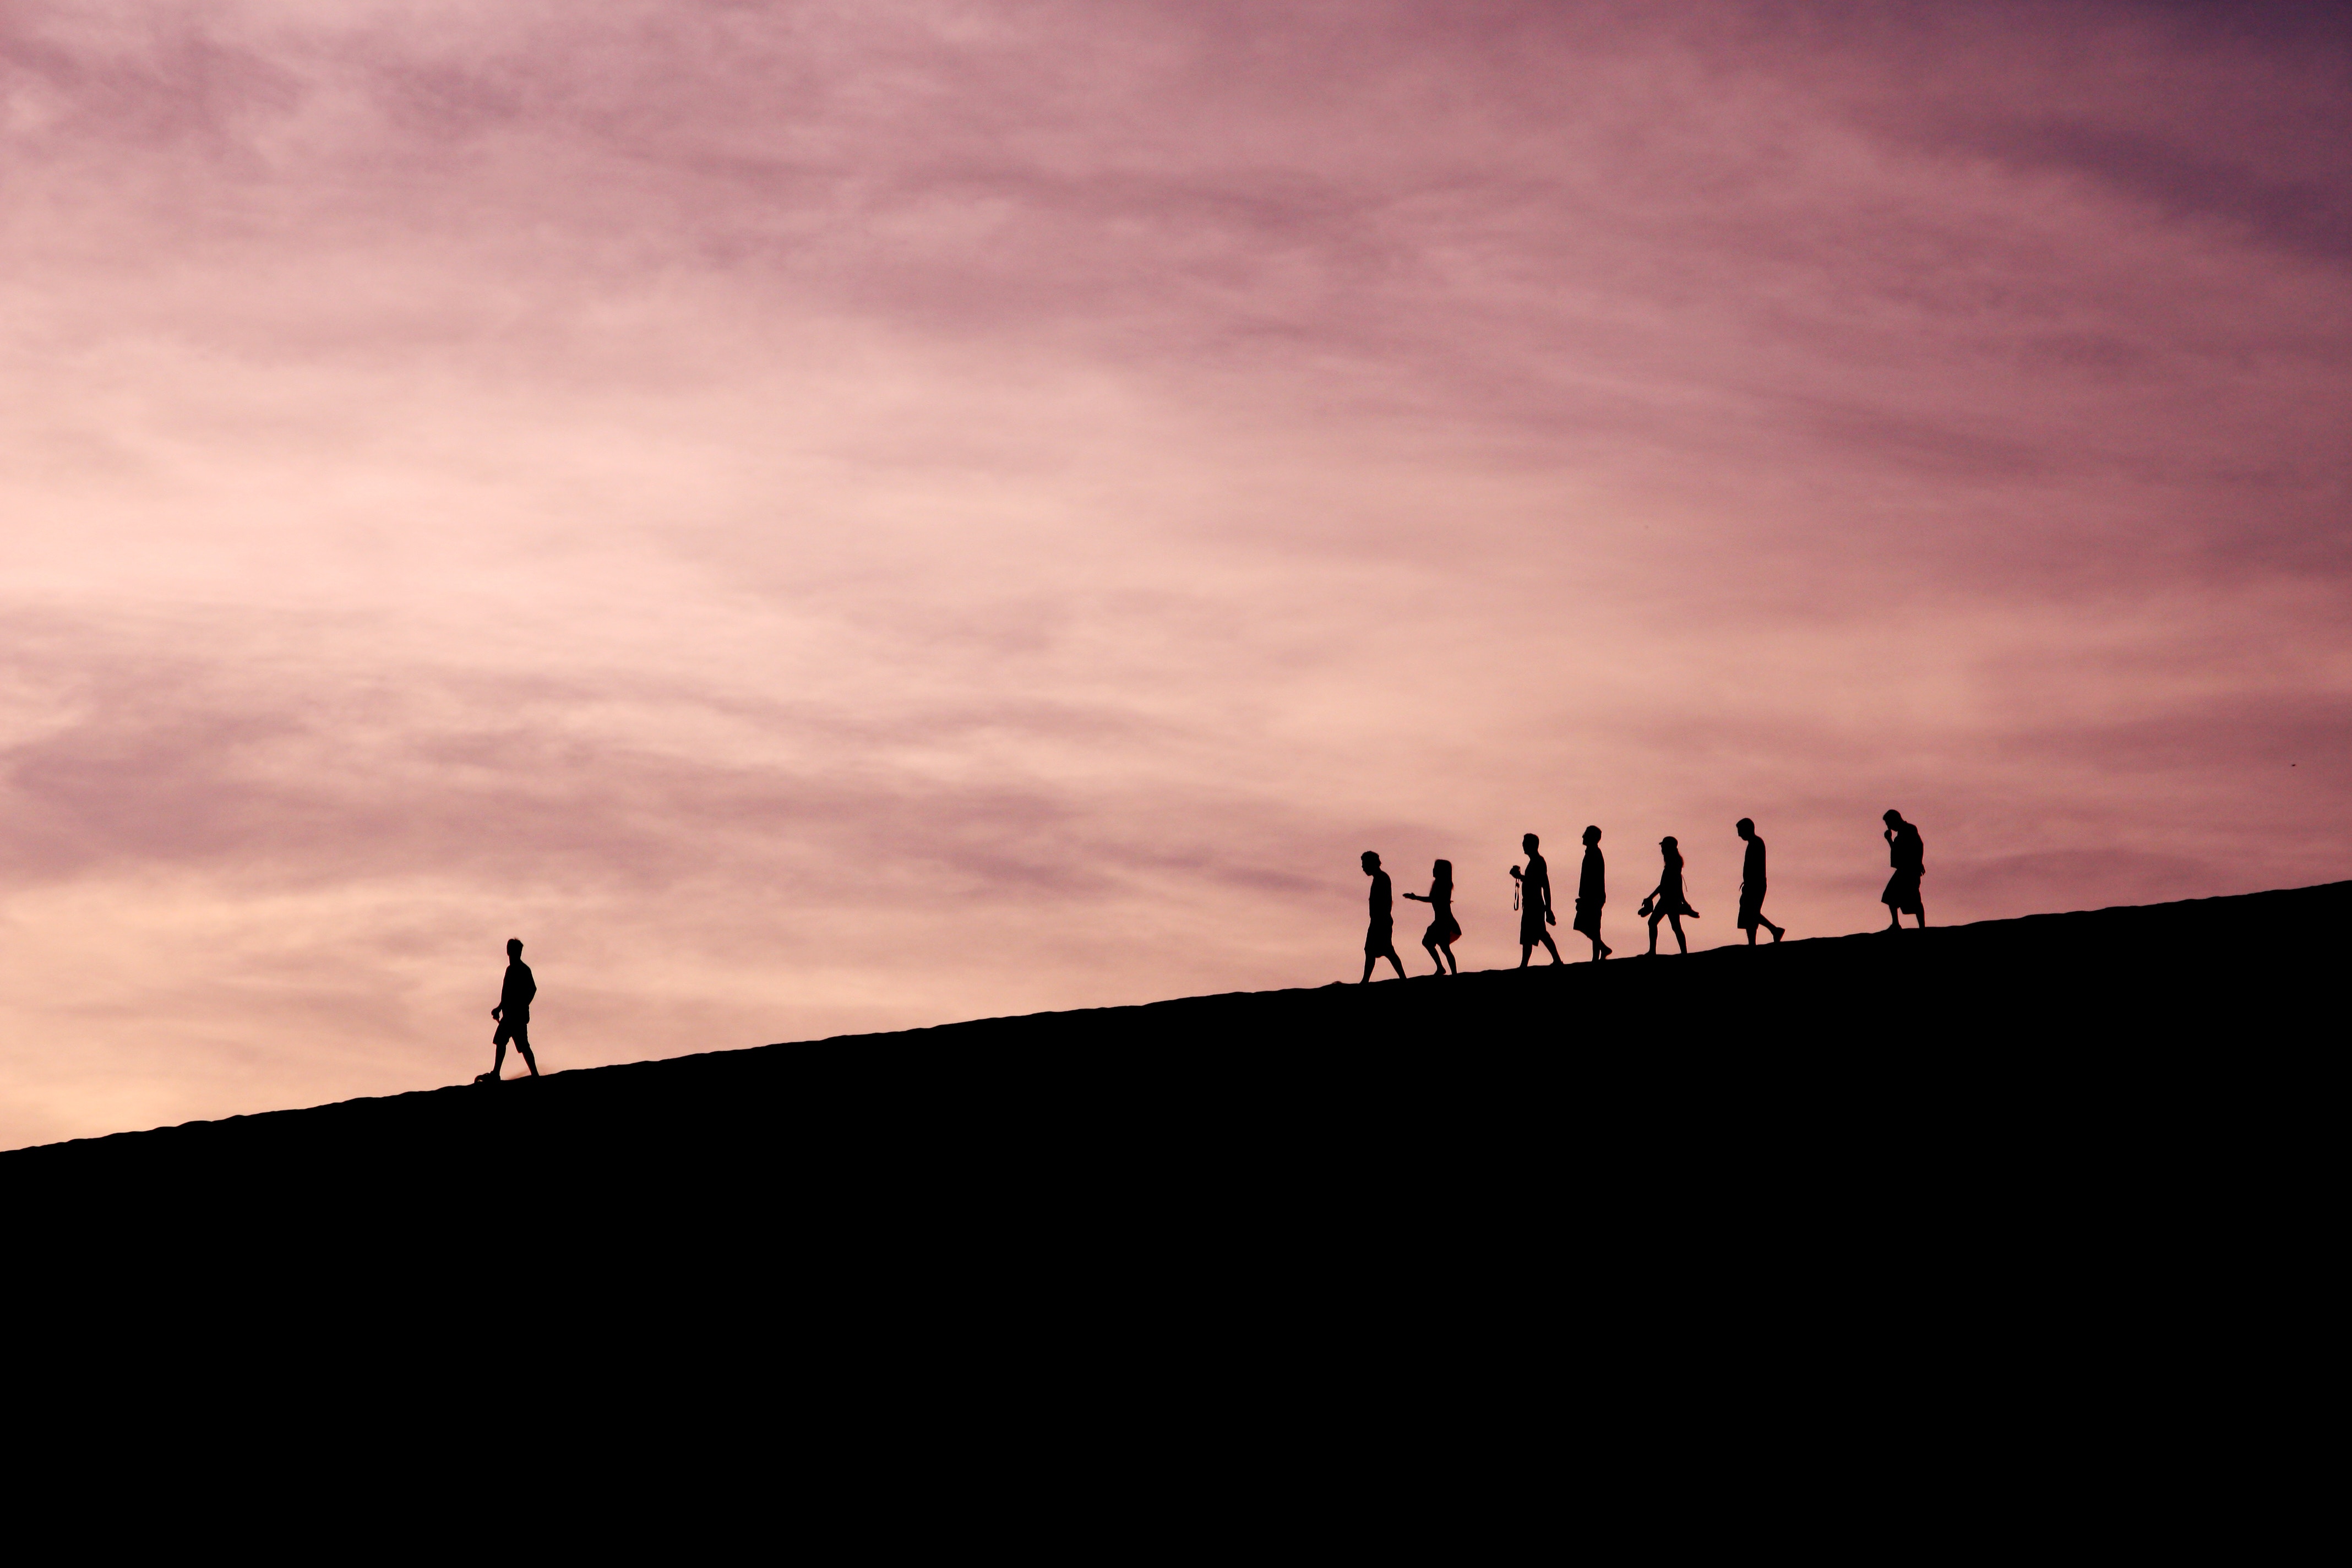 Dusky sky with people walking on a mountainous surface at a distance